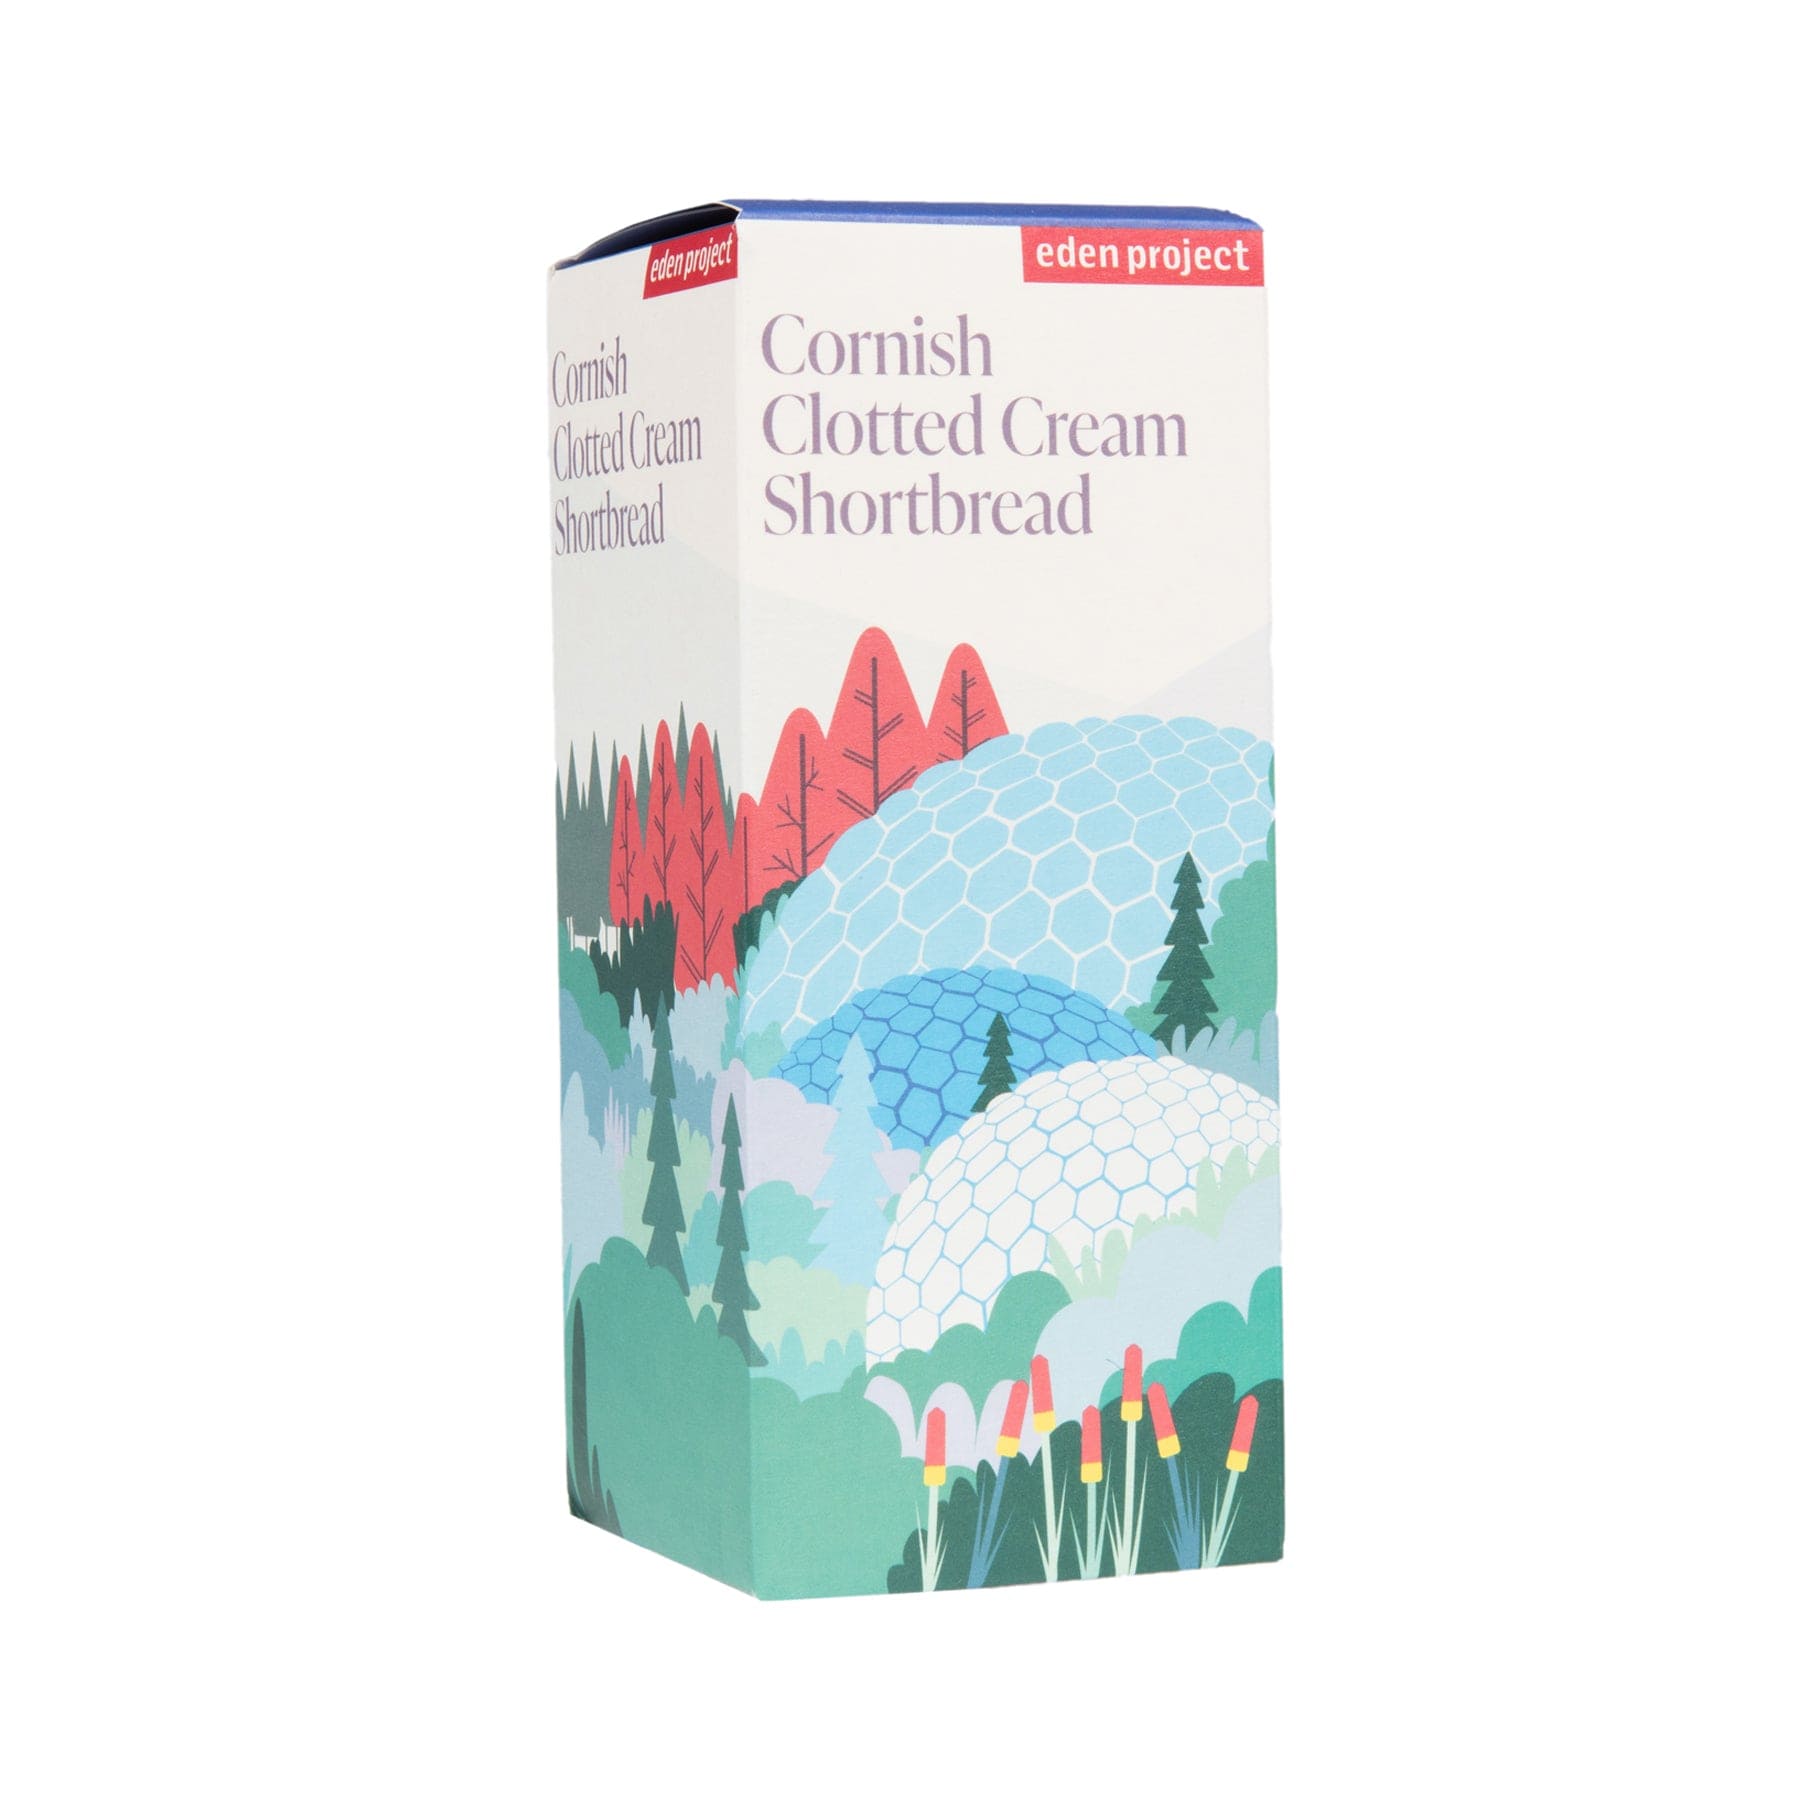 Cornish Clotted Cream Shortbread packaging with Eden Project branding, illustrated with a vibrant geometric dome, red trees, and foliage design on a white background.